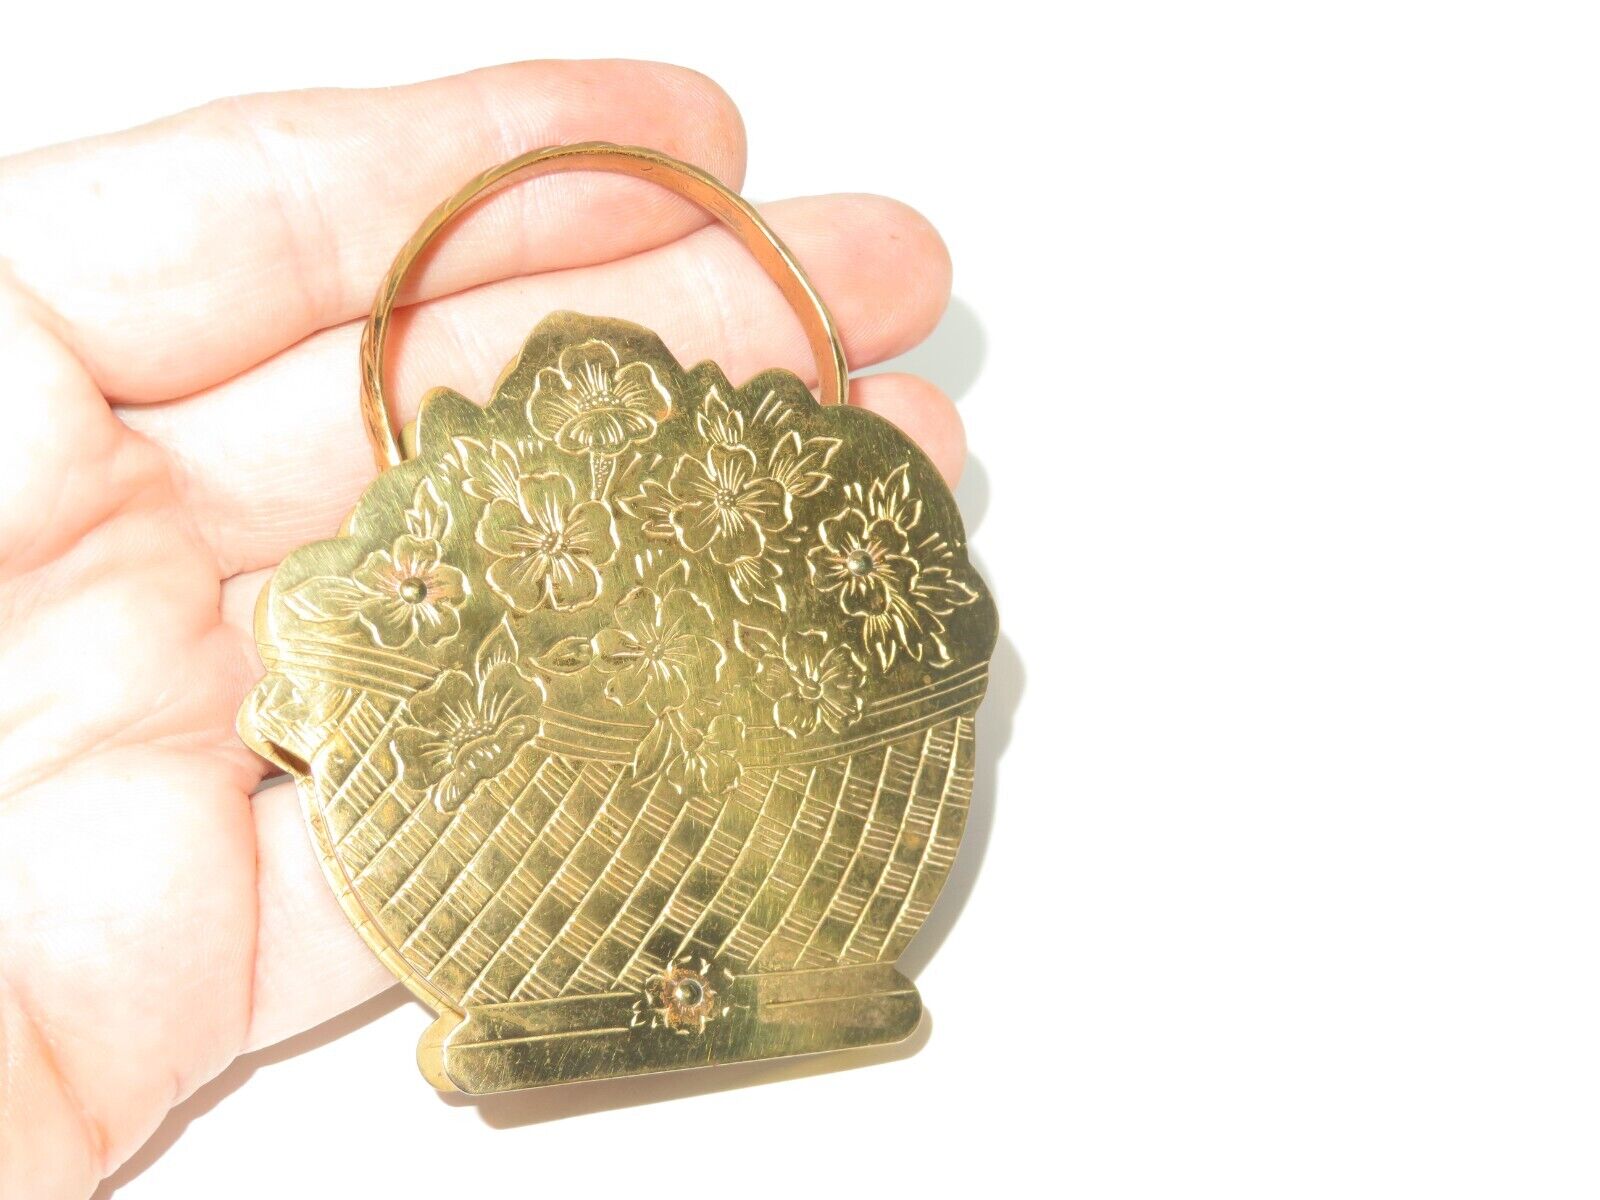 Vintage Powder Compact Flower Basket by Zell (C212)